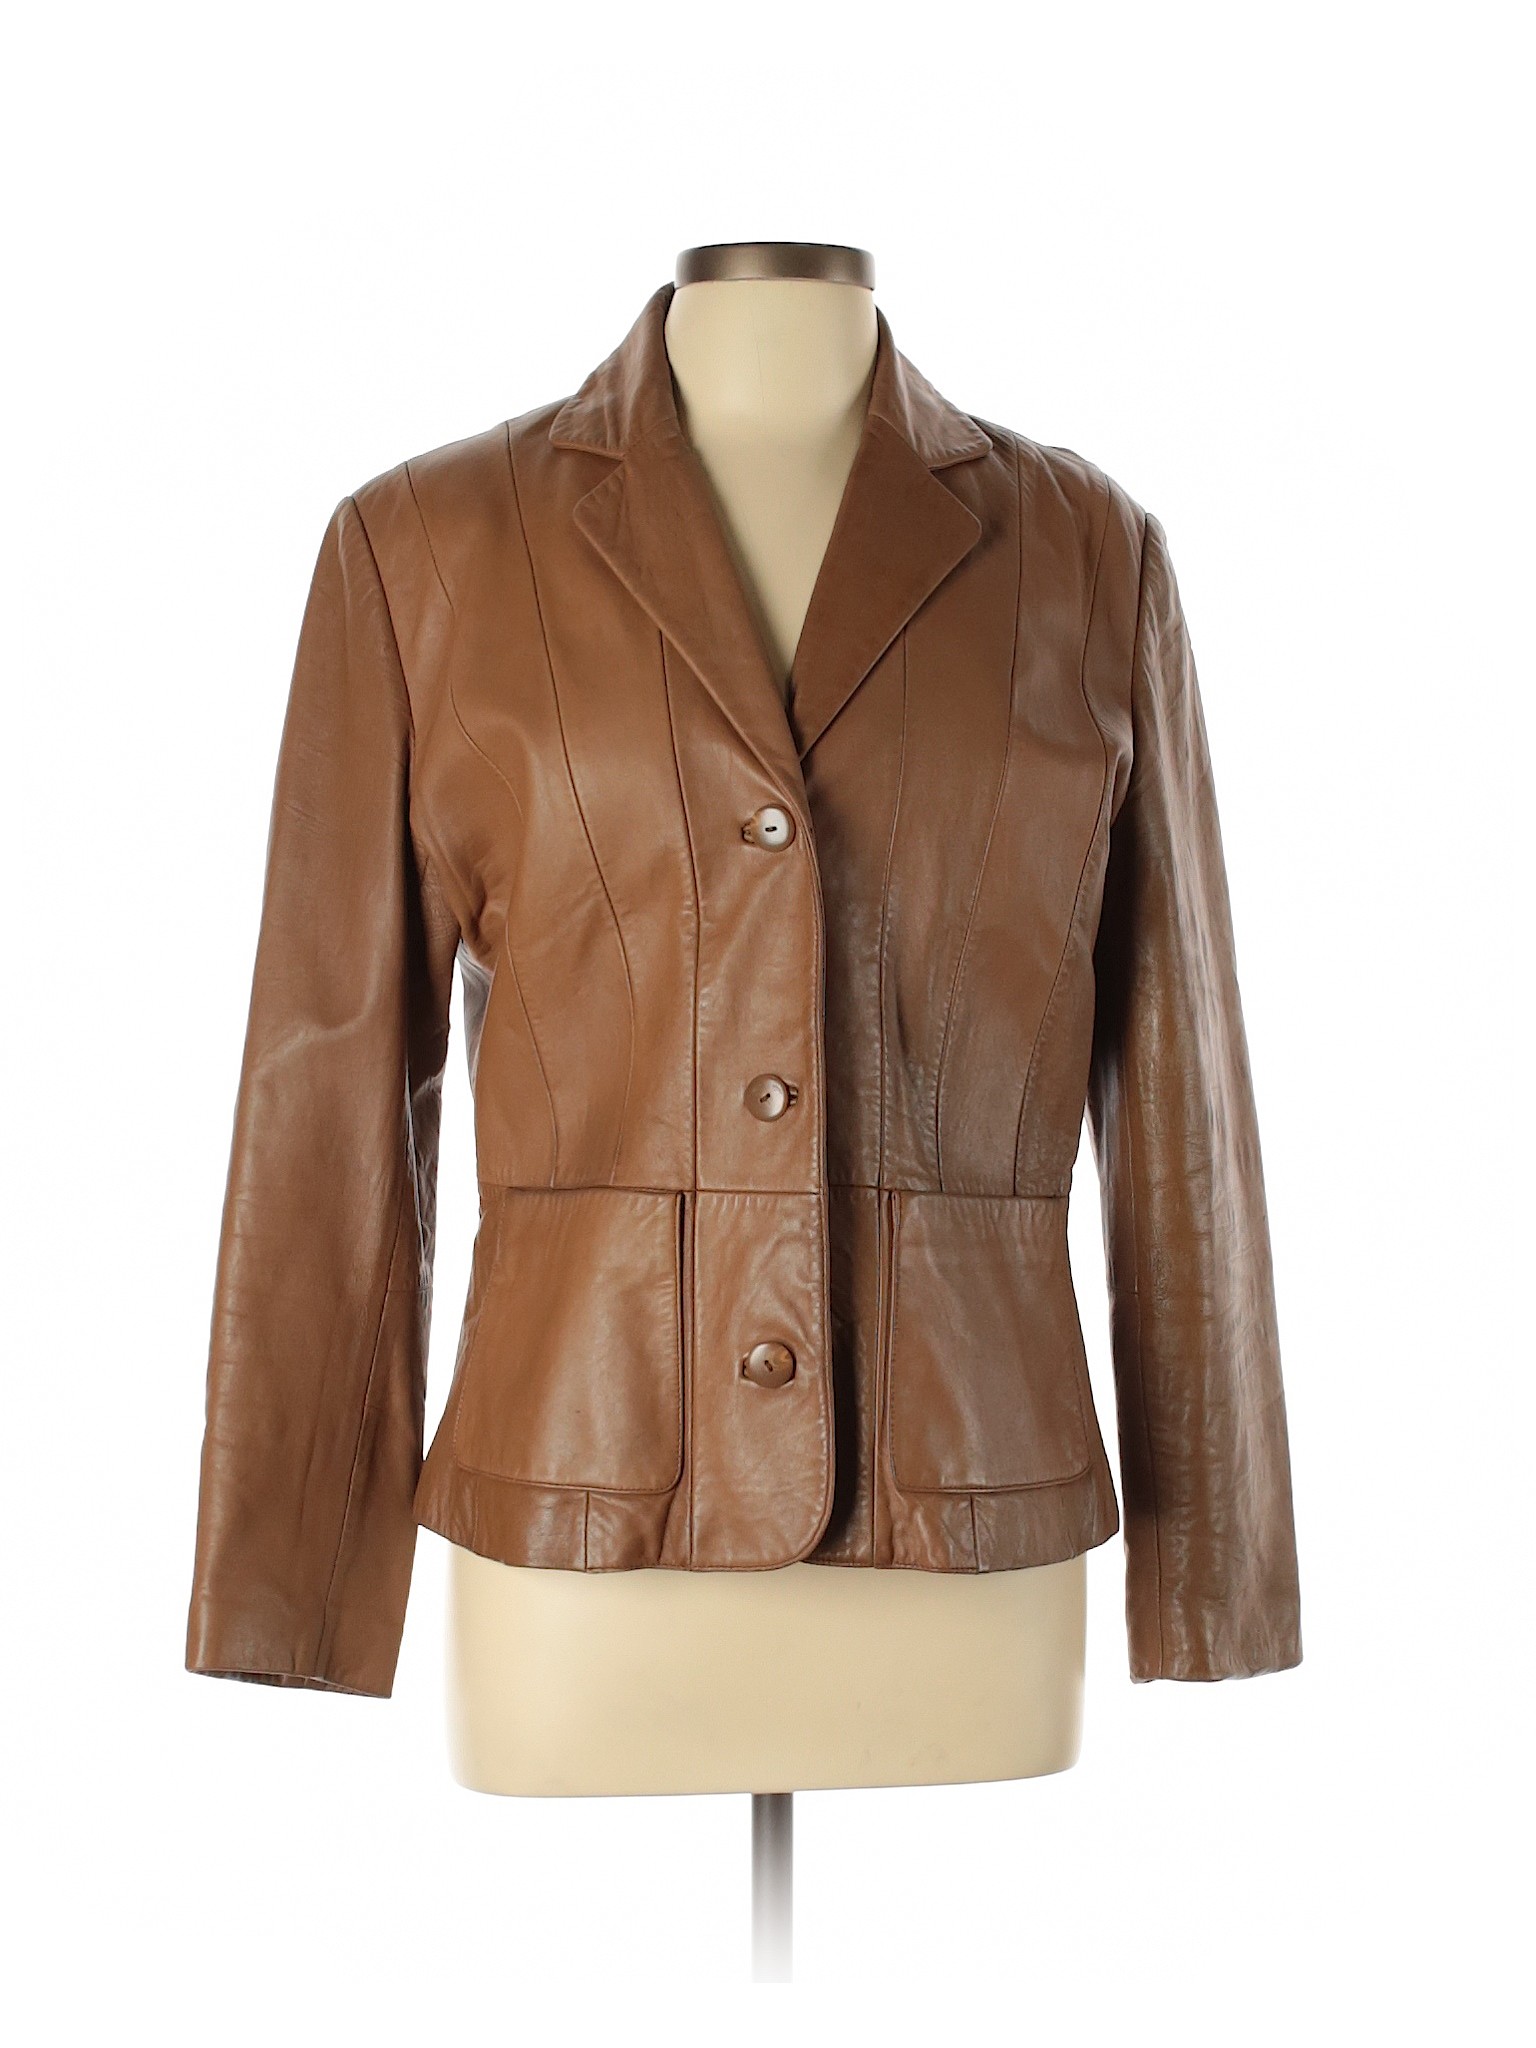 Monterey Bay Clothing Company 100% Leather Solid Tan Brown Leather ...